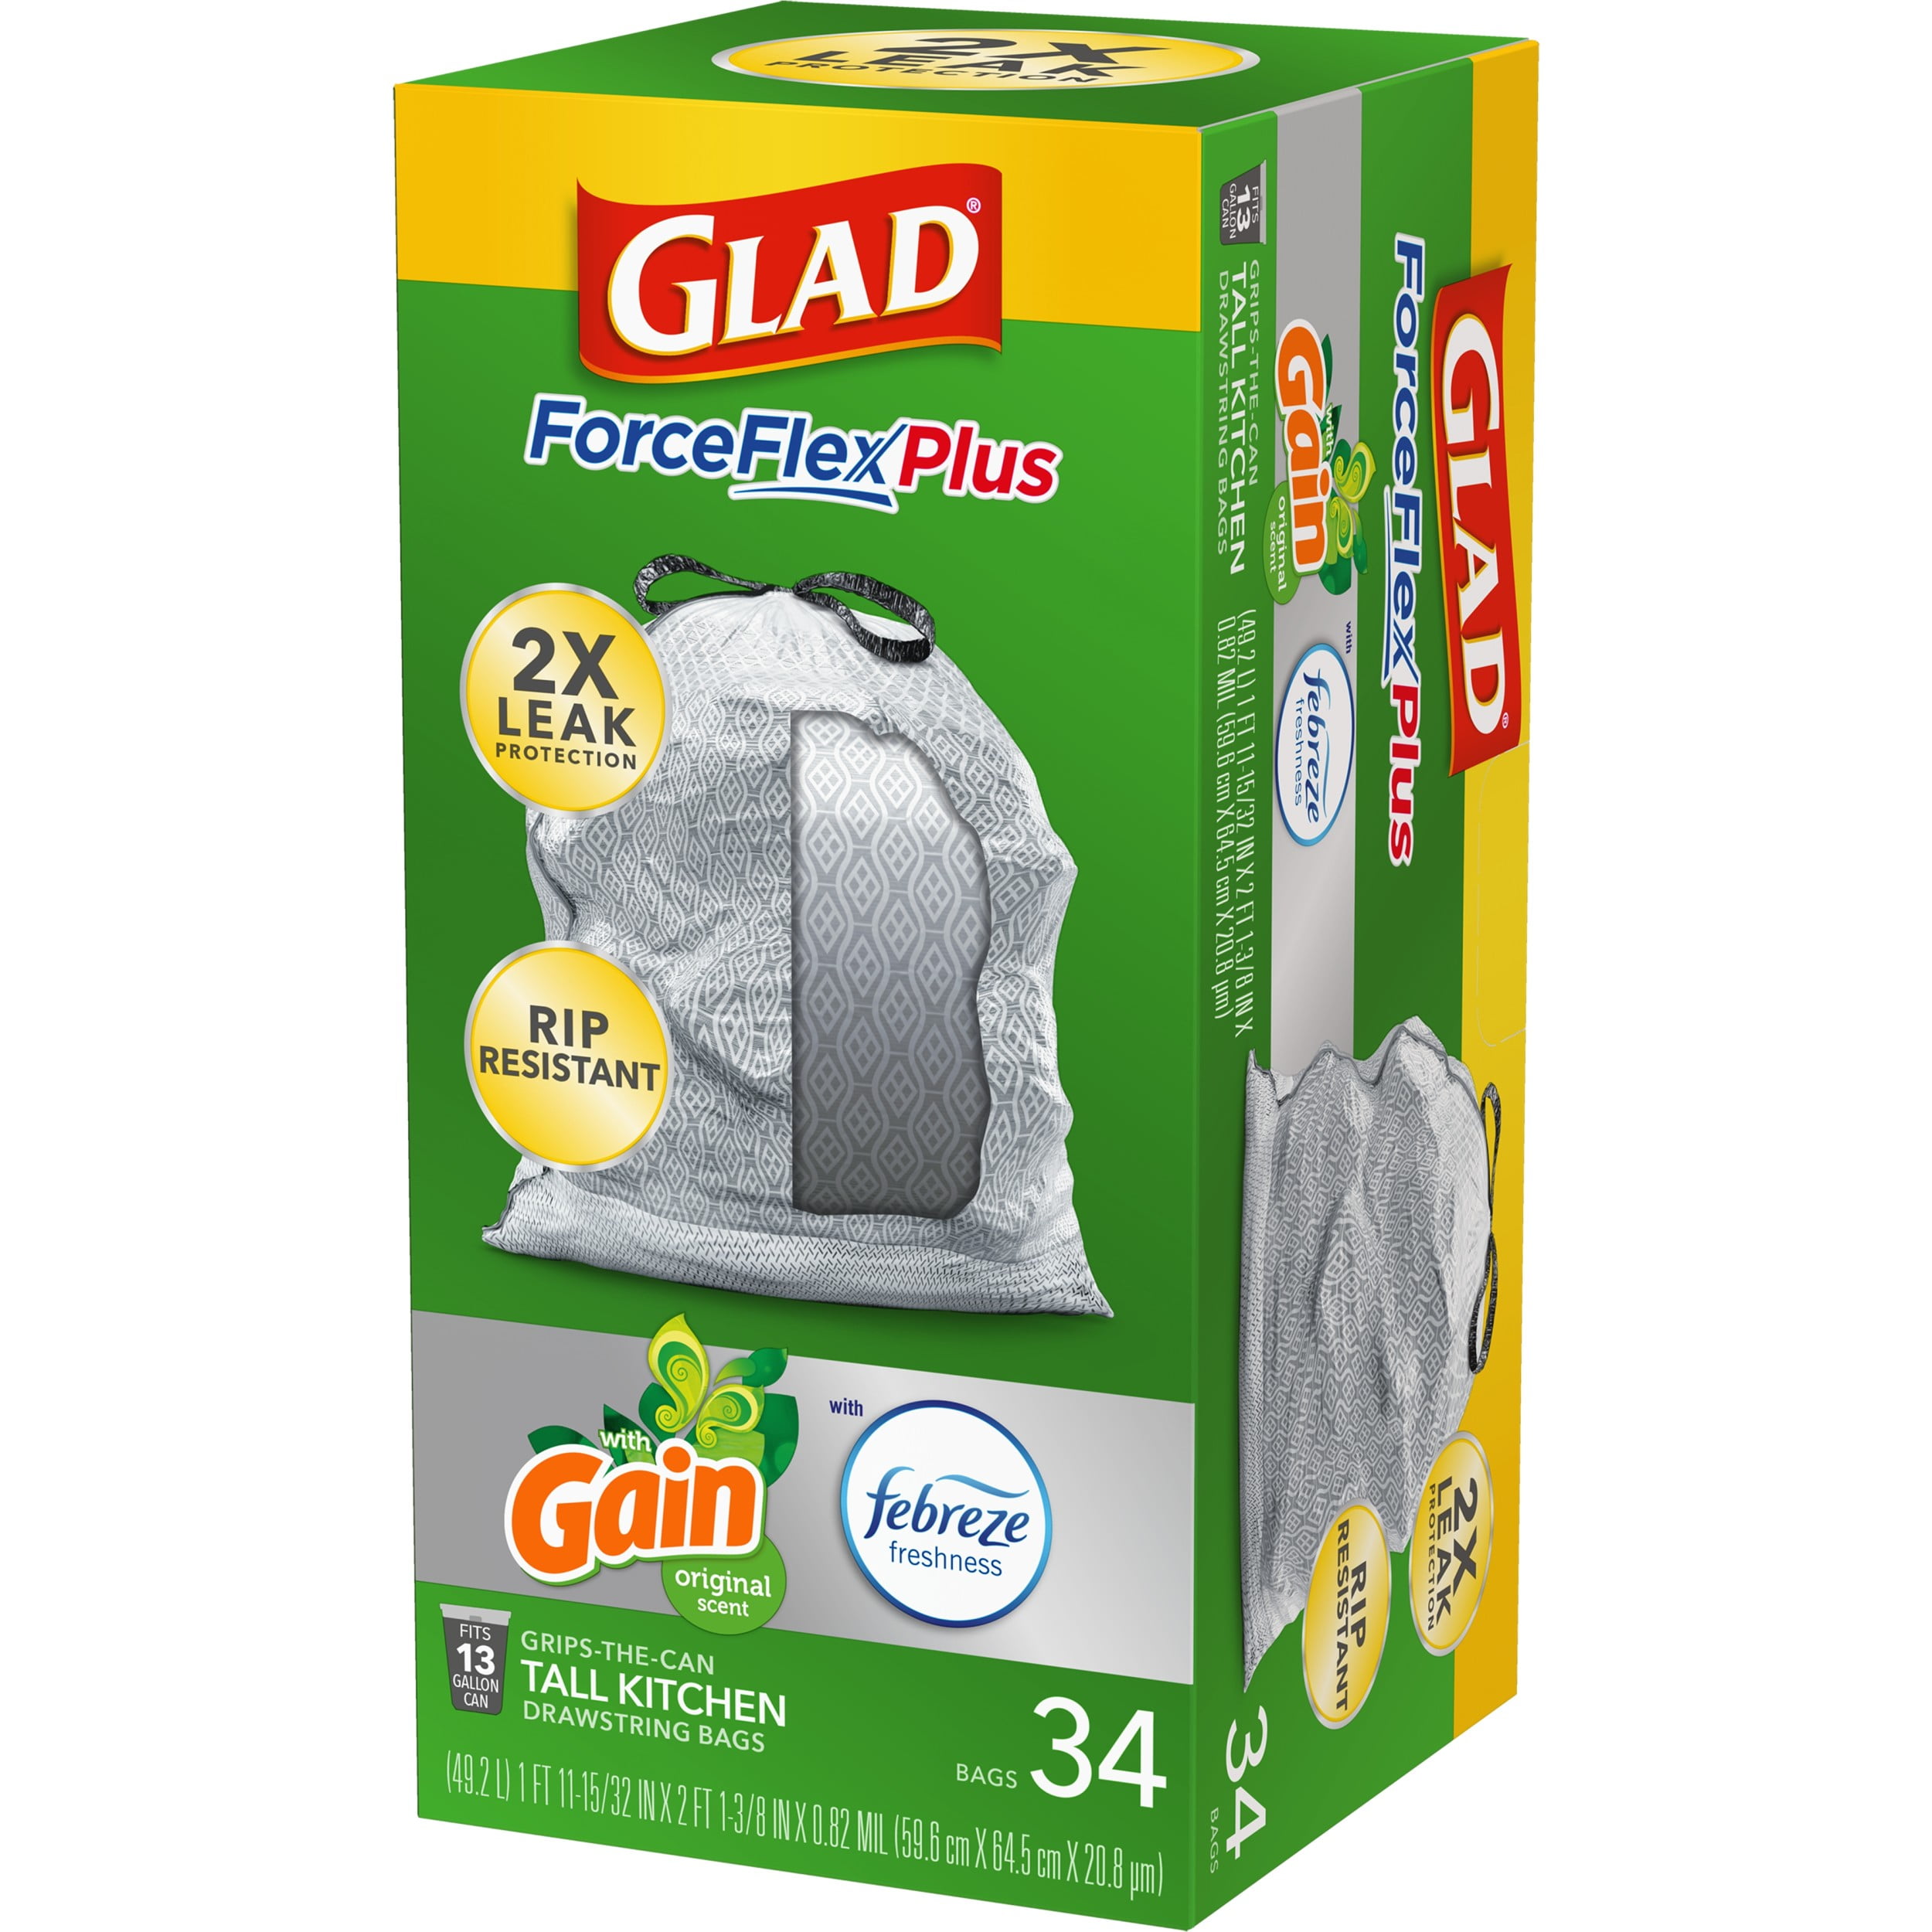 Glad® ForceFlex Plus Gain Original Scent with Febreze Freshness Tall 13  Gallon Kitchen Trash Bags, 34 ct - Fry's Food Stores